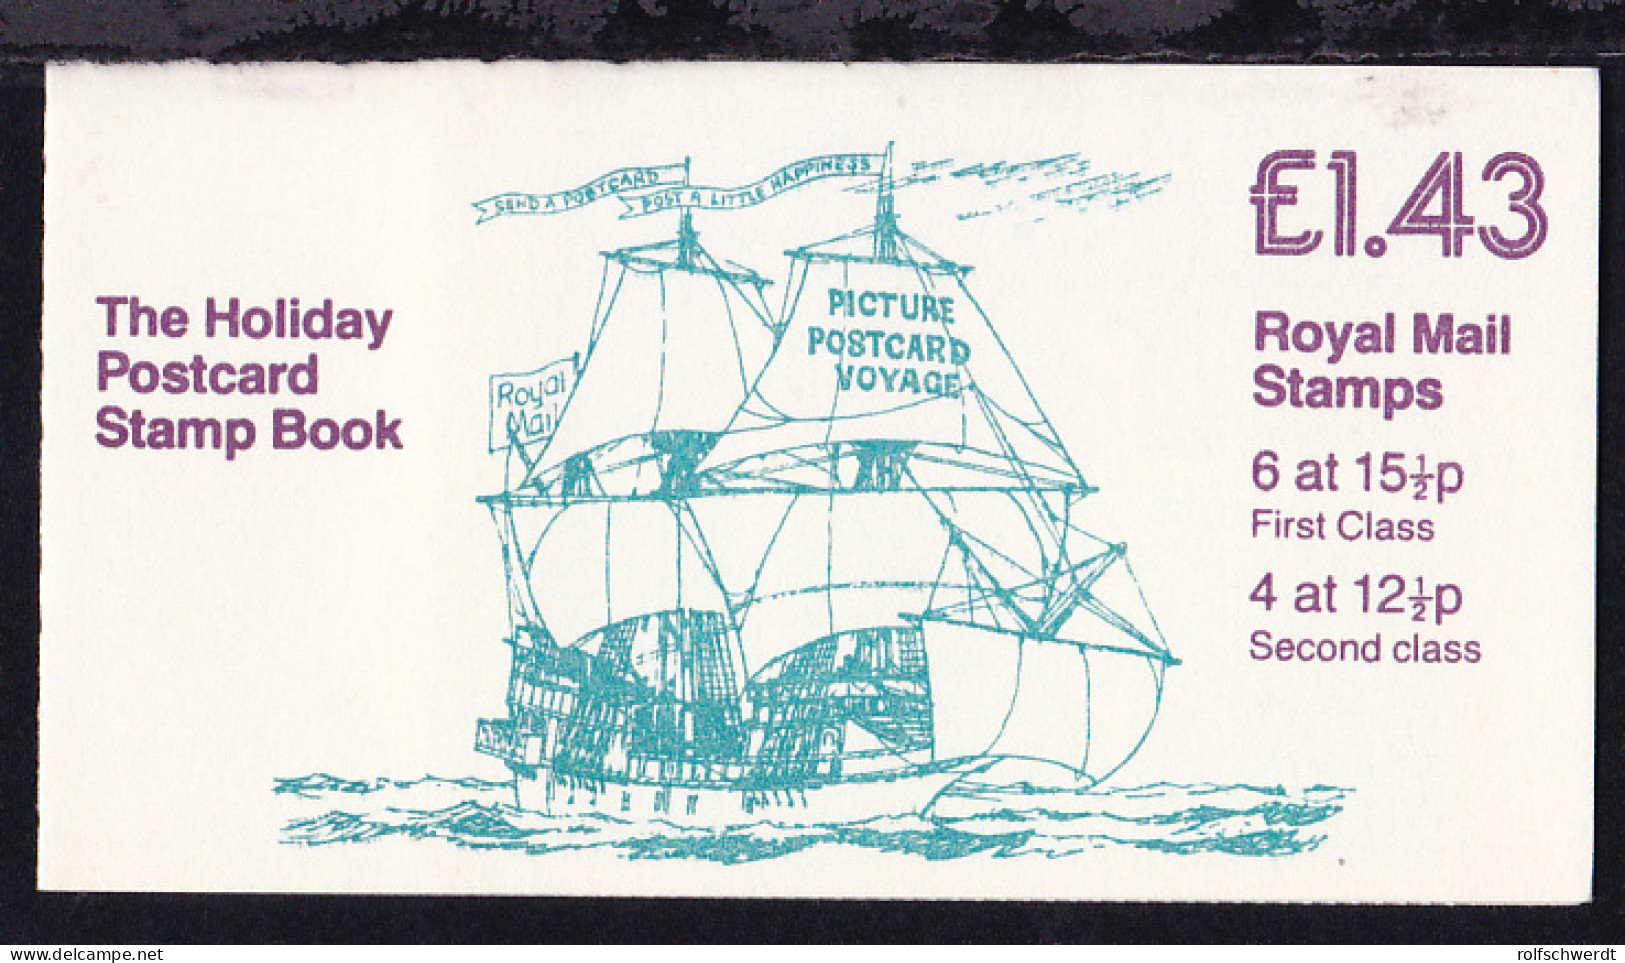 The Holiday Postcard Stamp Book - Libretti